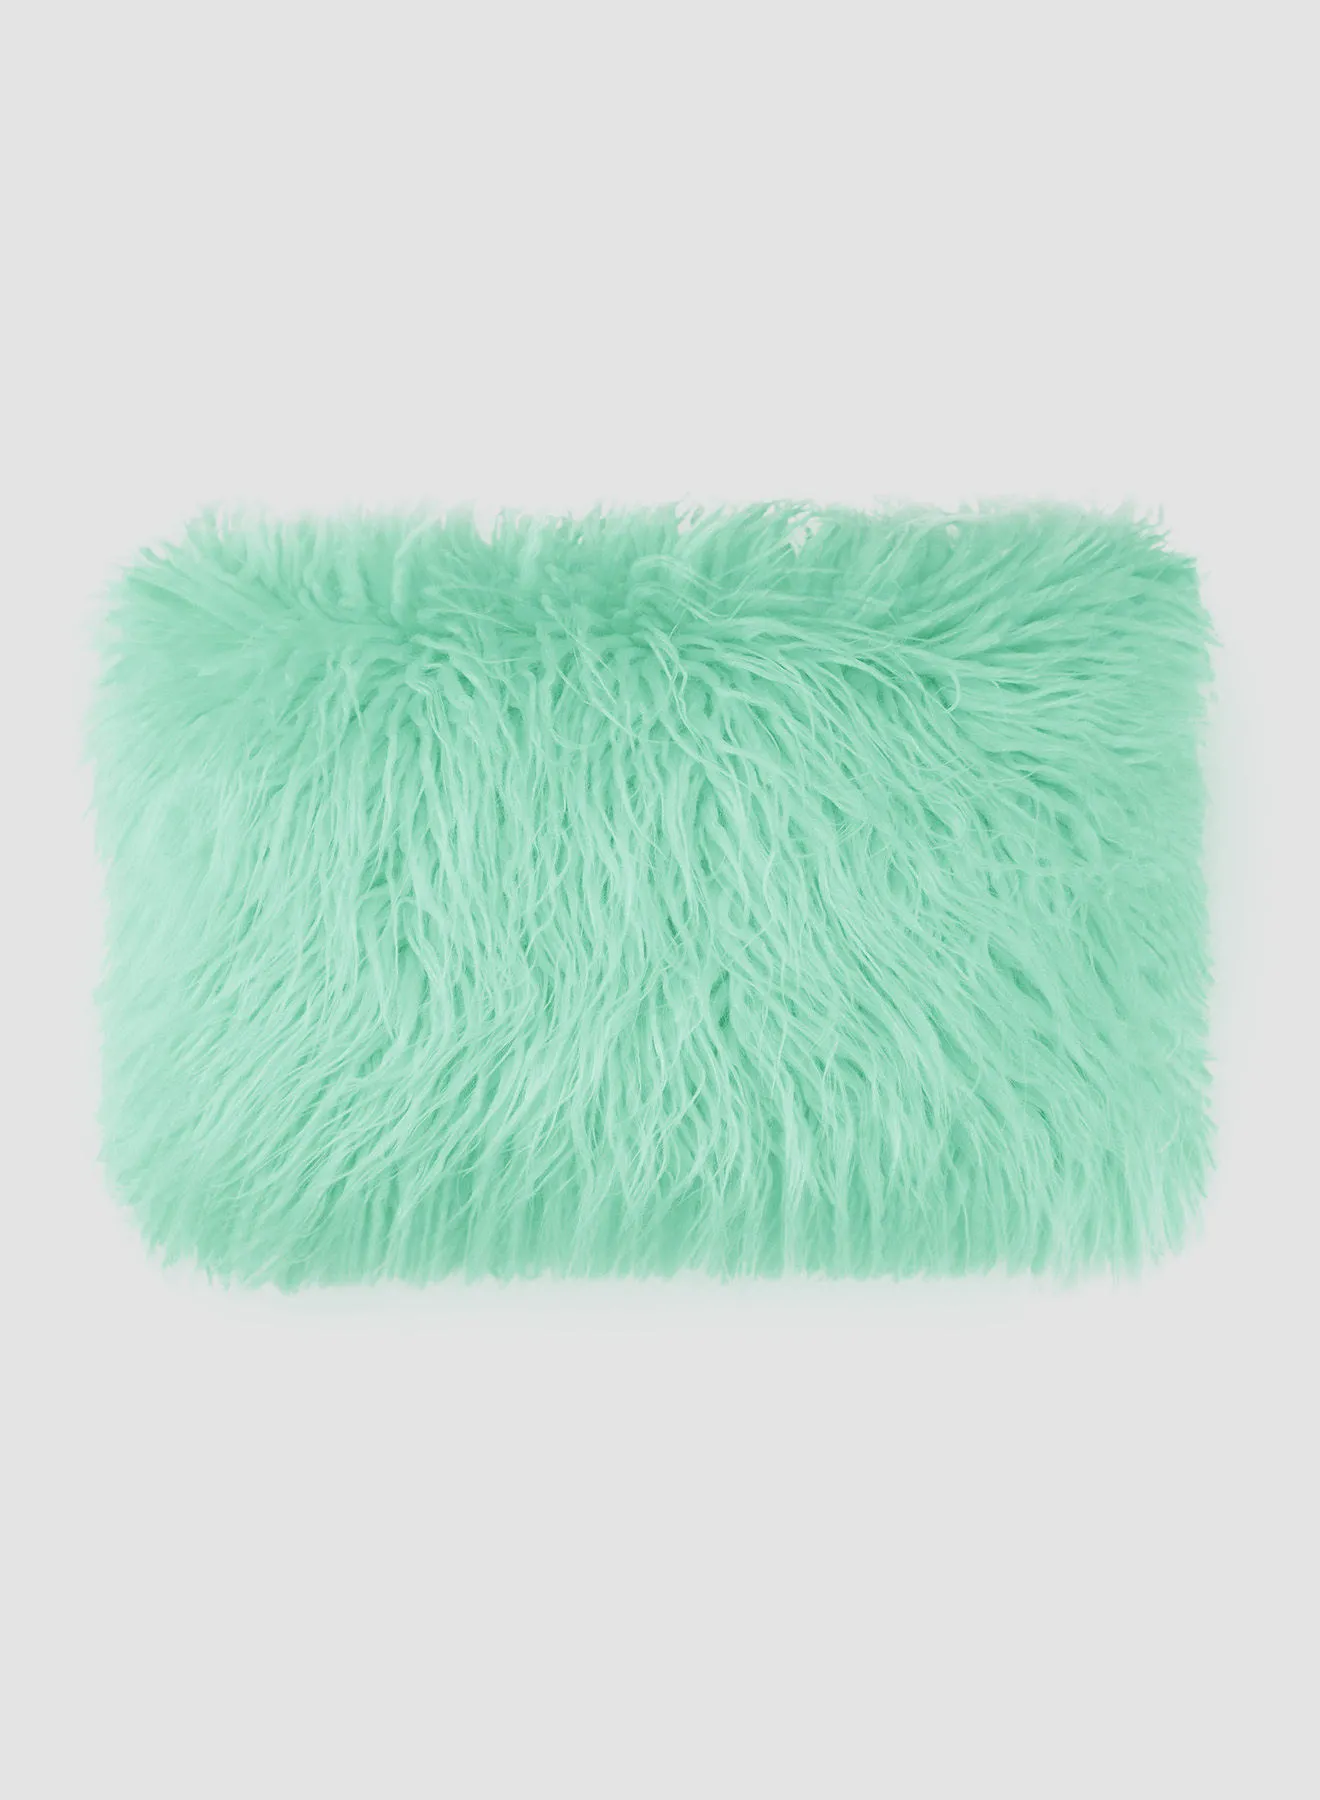 ebb & flow Faux Fur Cushion, Unique Luxury Quality Decor Items for the Perfect Stylish Home Green 30 x 50cm